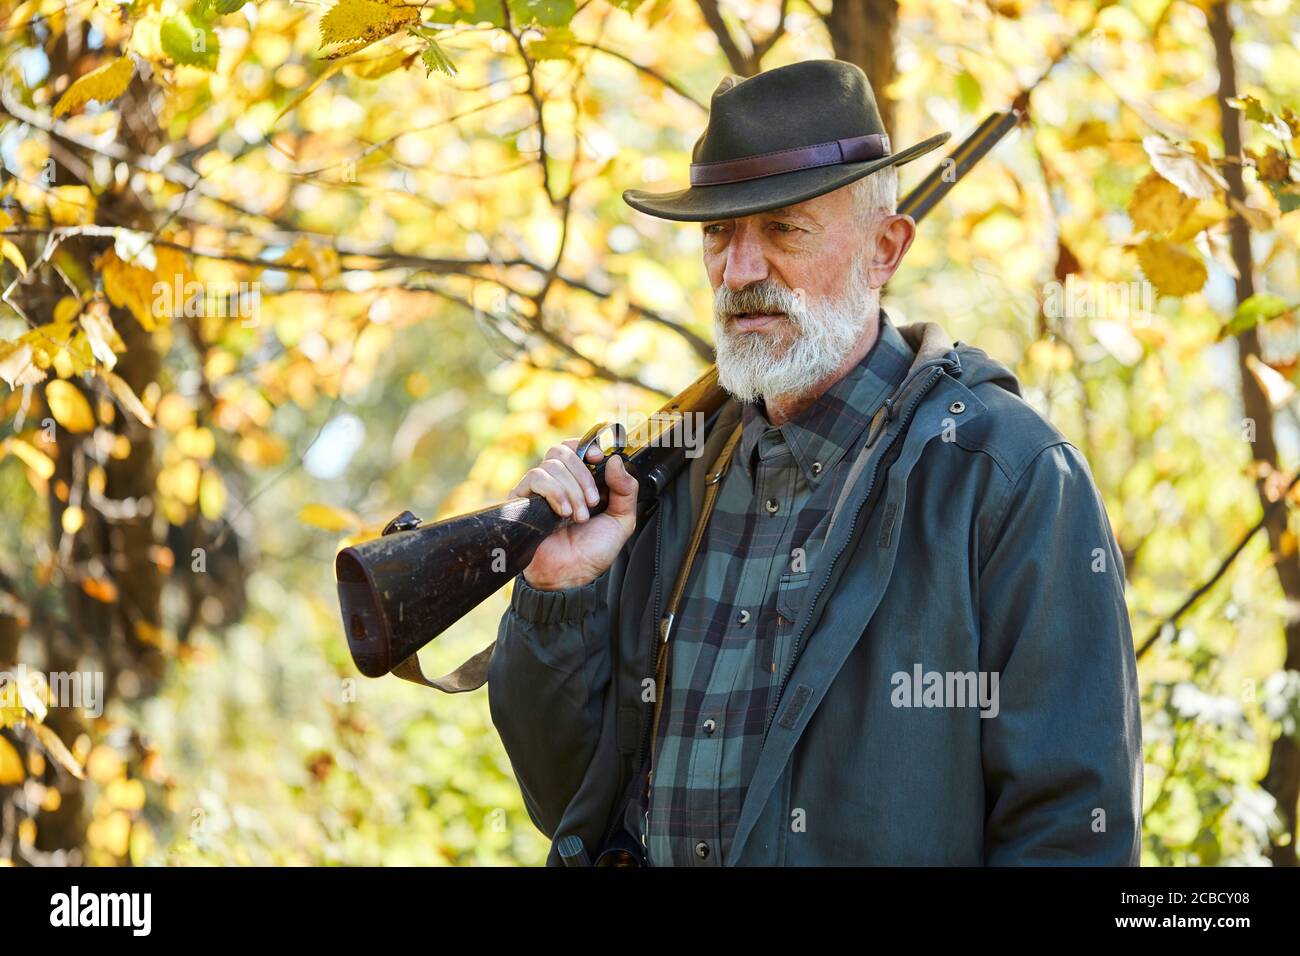 Forest hunting on animals. Senior man holding shotgun, Upset after hunting in forest Stock Photo